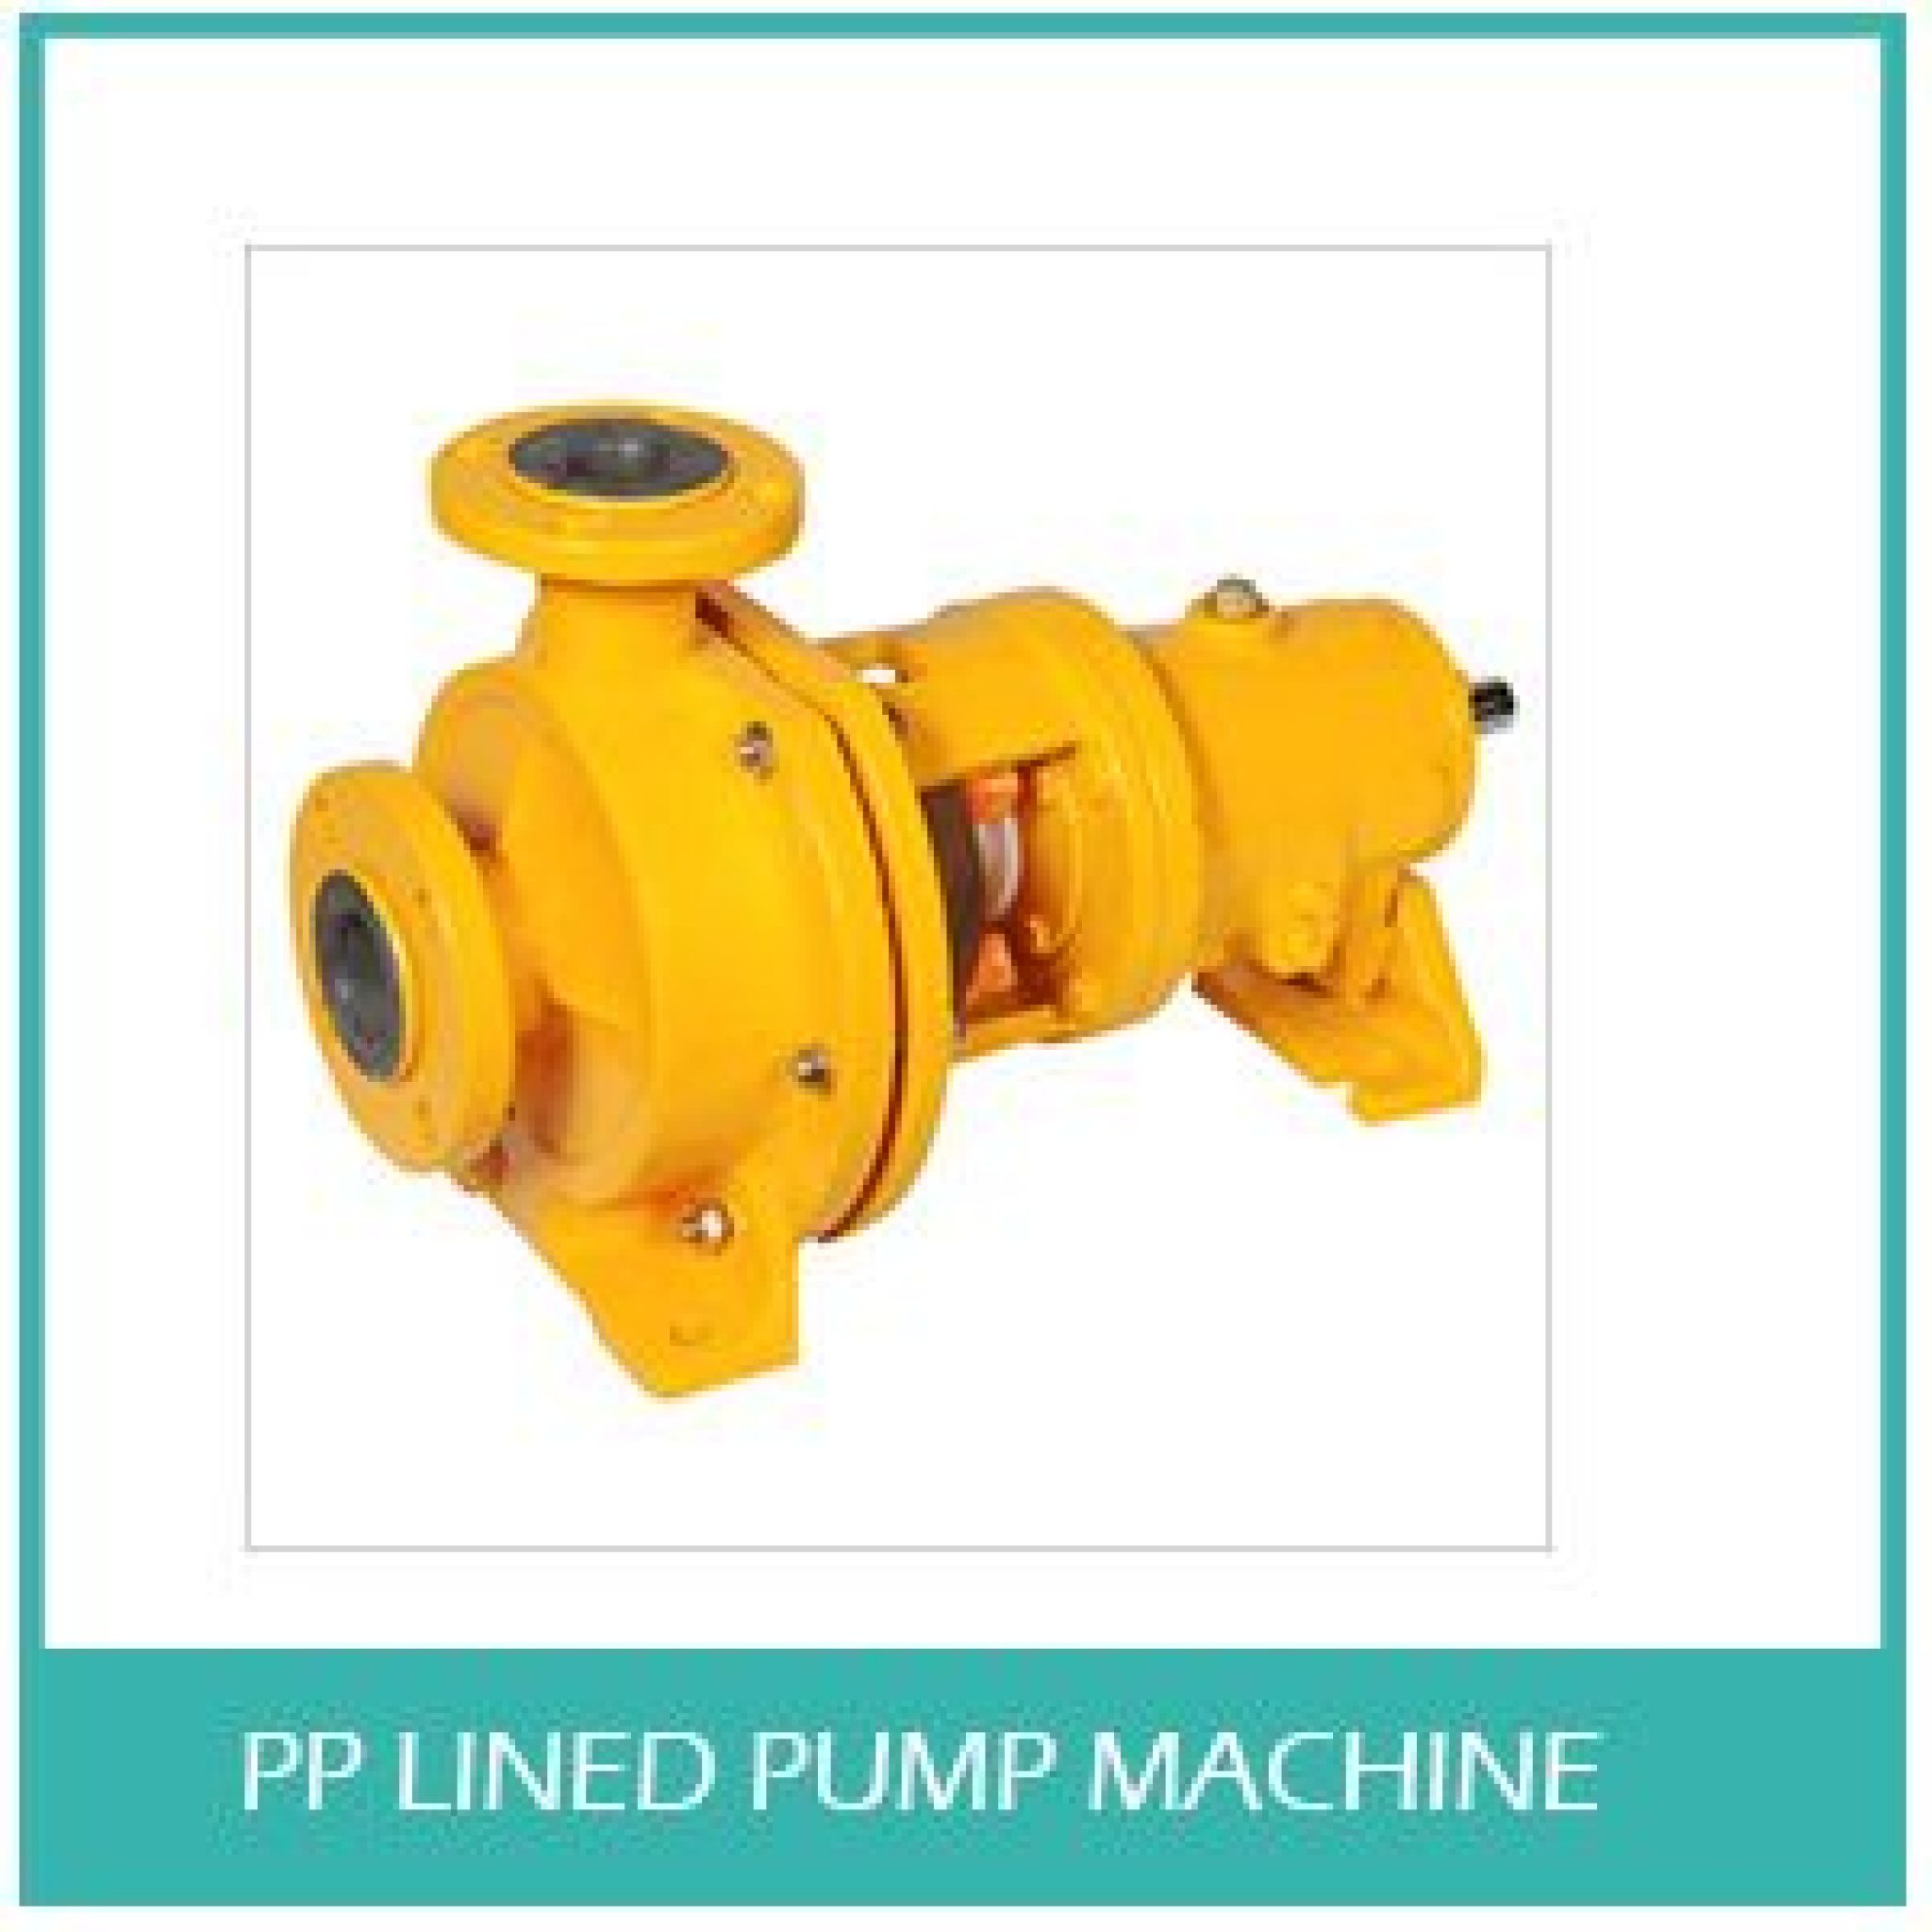 Manufacturer, Supplier and Exporter of PP Lined Pump Machine in Ahmedabad, Gujarat, India